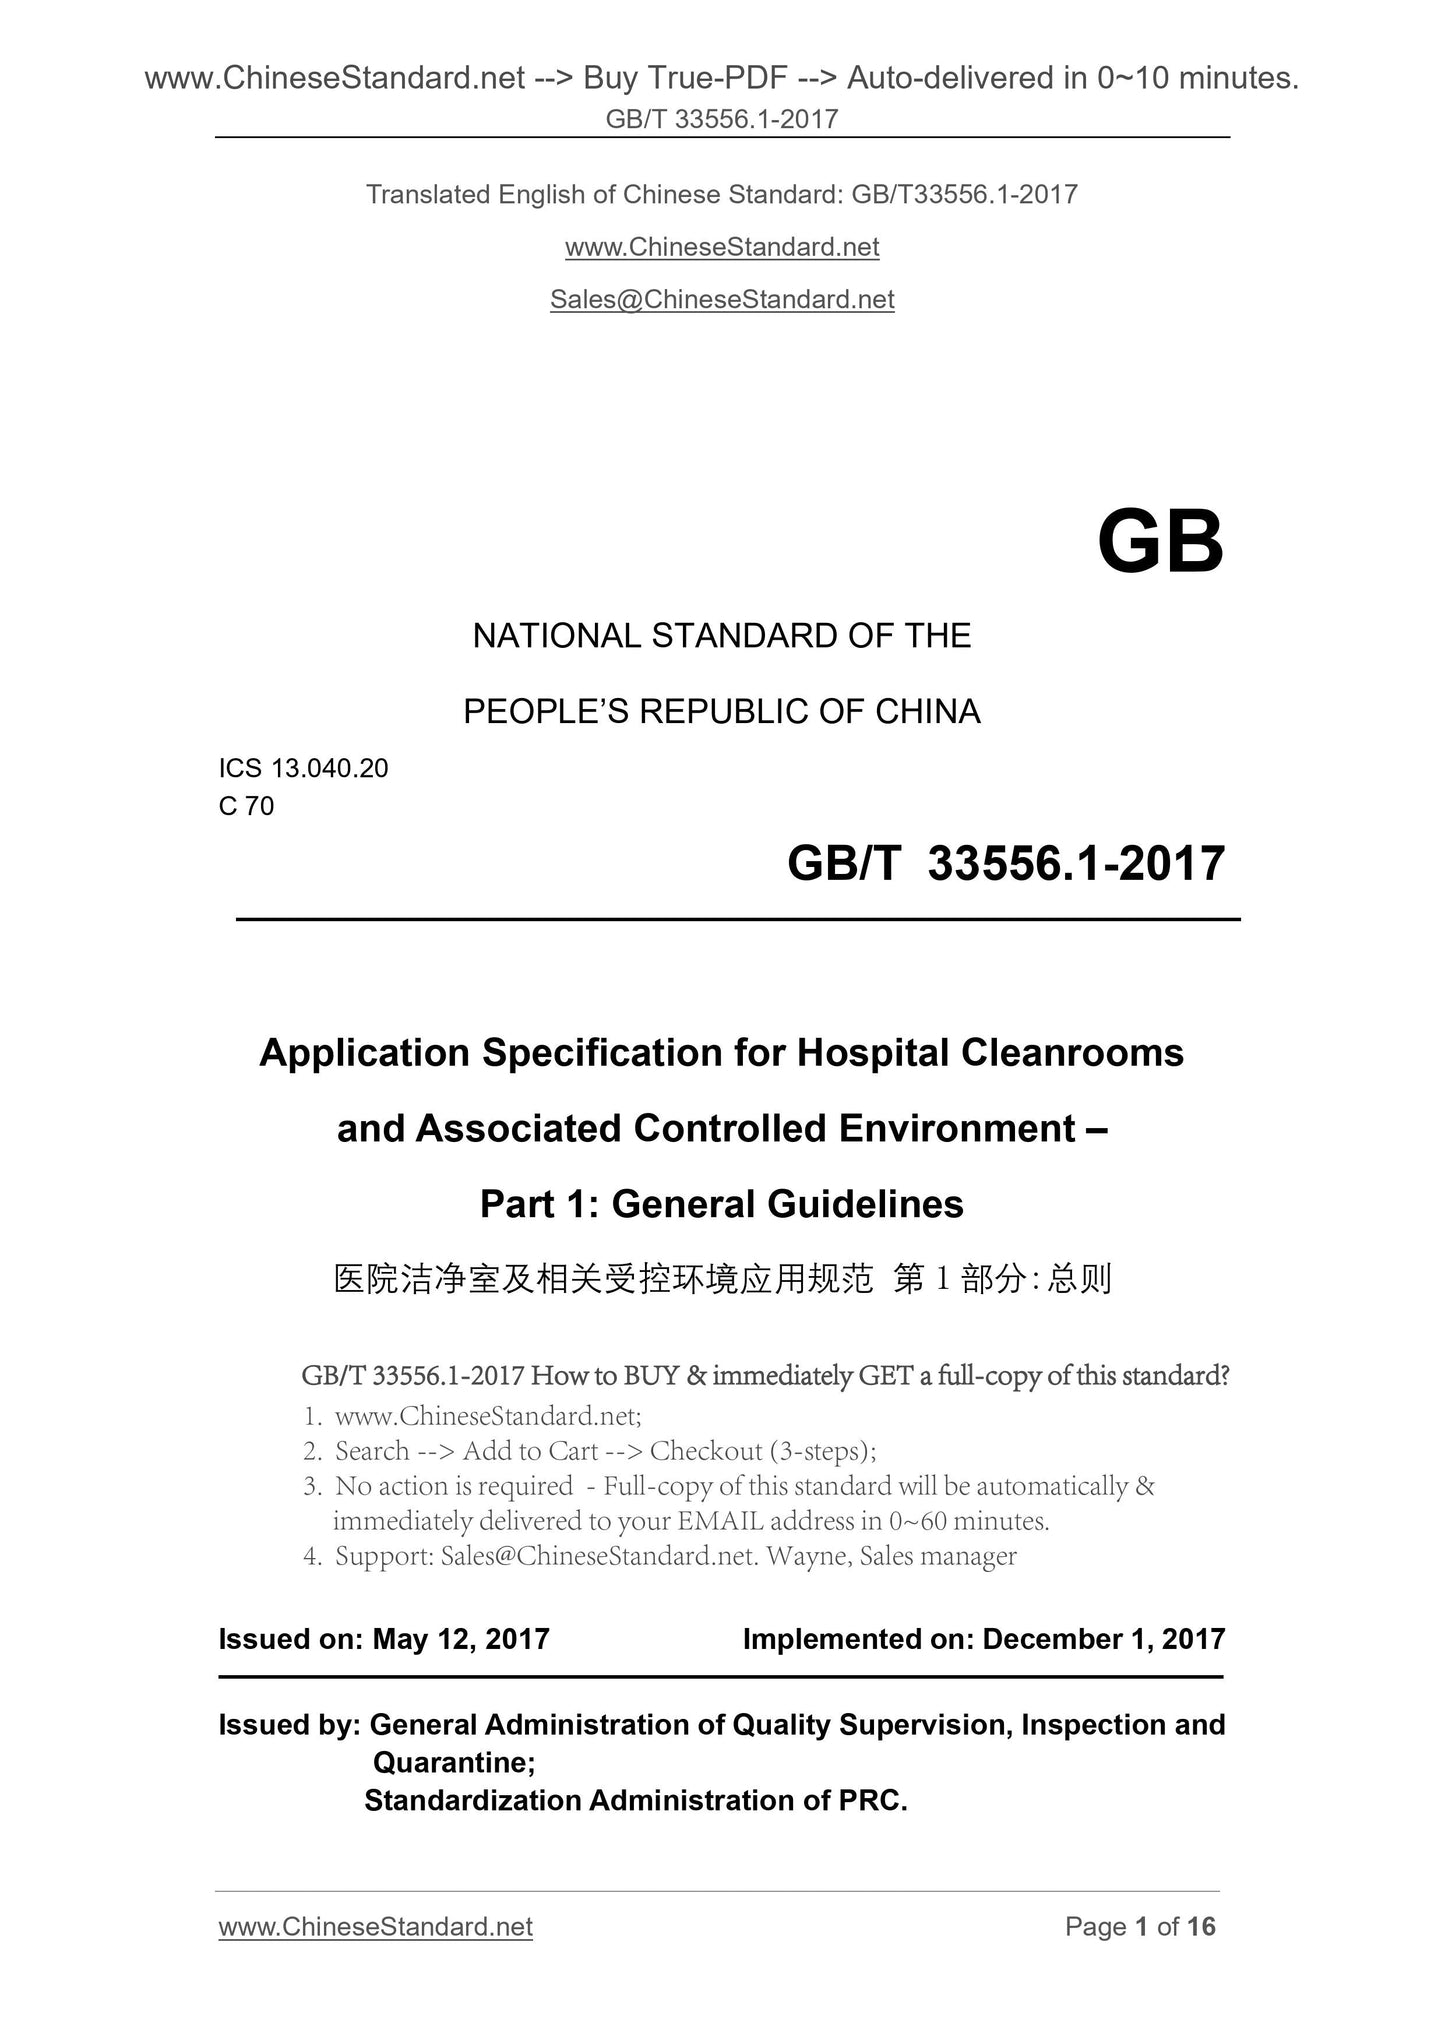 GB/T 33556.1-2017 Page 1